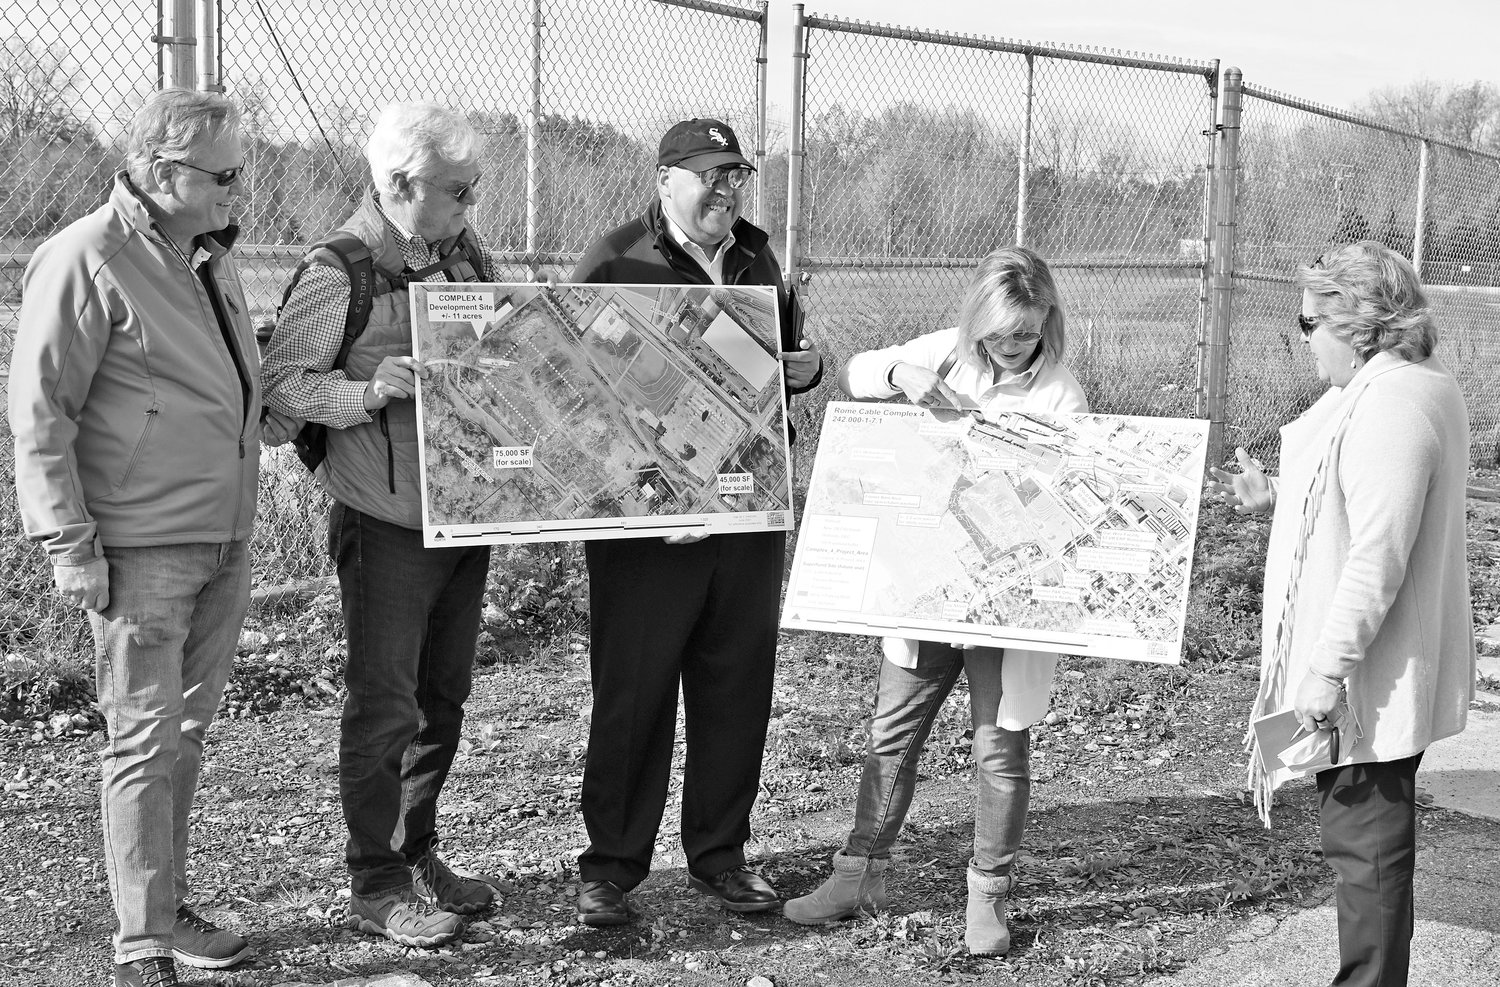 ALL THE POSSIBILITIES — Members of Counselors of Real Estate’s CRE Consulting Corps gather around the Rome Cable Complex 4 site off Henry Street to look at maps and share insights in redeveloping the brownfield Wednesday morning.  From left: Michael Hedden, managing director Integra Realty Resources, Philadelphia, Pa.; R.J. Neary, chairman of Investors Realty, Inc., Omaha, Neb.; Attorney Graham C. Grady, Taft Stettinius &amp; Hollister, LLP, Chicago, Ill.; Joelle Greenland, of the Center for Creative Land Recycling; and Christina Thoreson, lead counselor of Real Counsel, LLC, Lookout Mountain, Tenn.